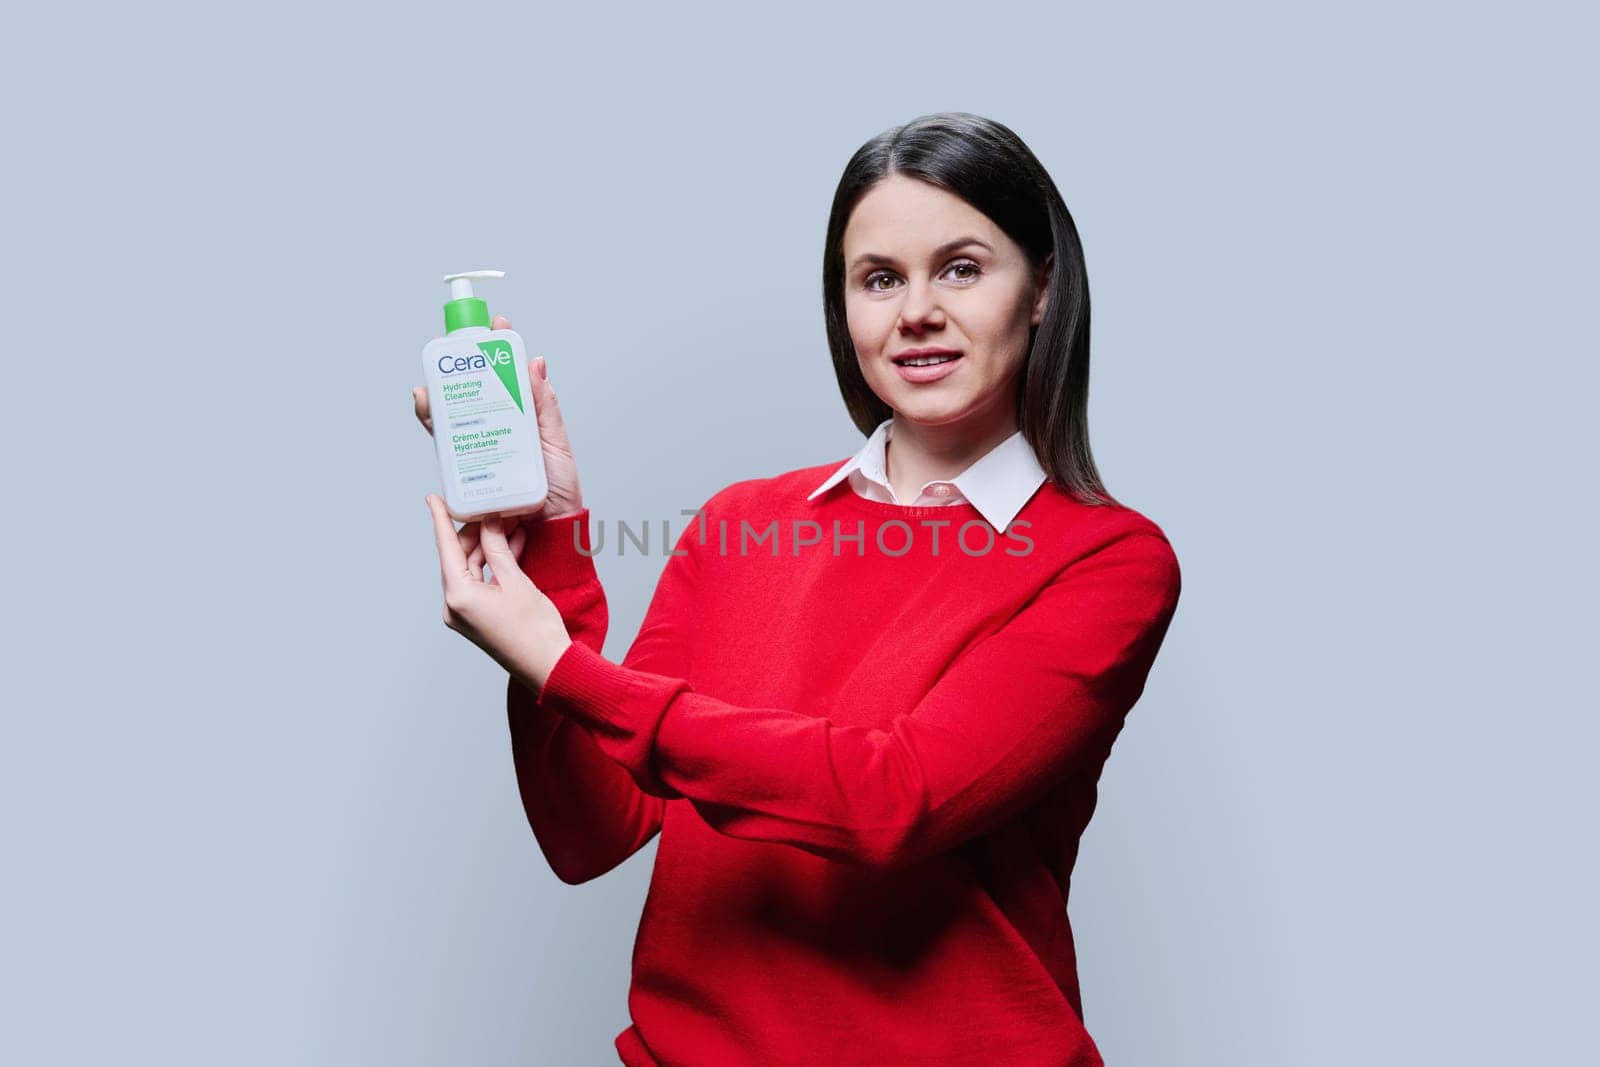 Kyiv, Ukraine, 01.03.2023, Pharmacy dermocosmetics, woman dermatologist recommending cleansing moisturizing emulsion CeraVe, hydrating cleanser for normal to dry skin, on light gray studio background